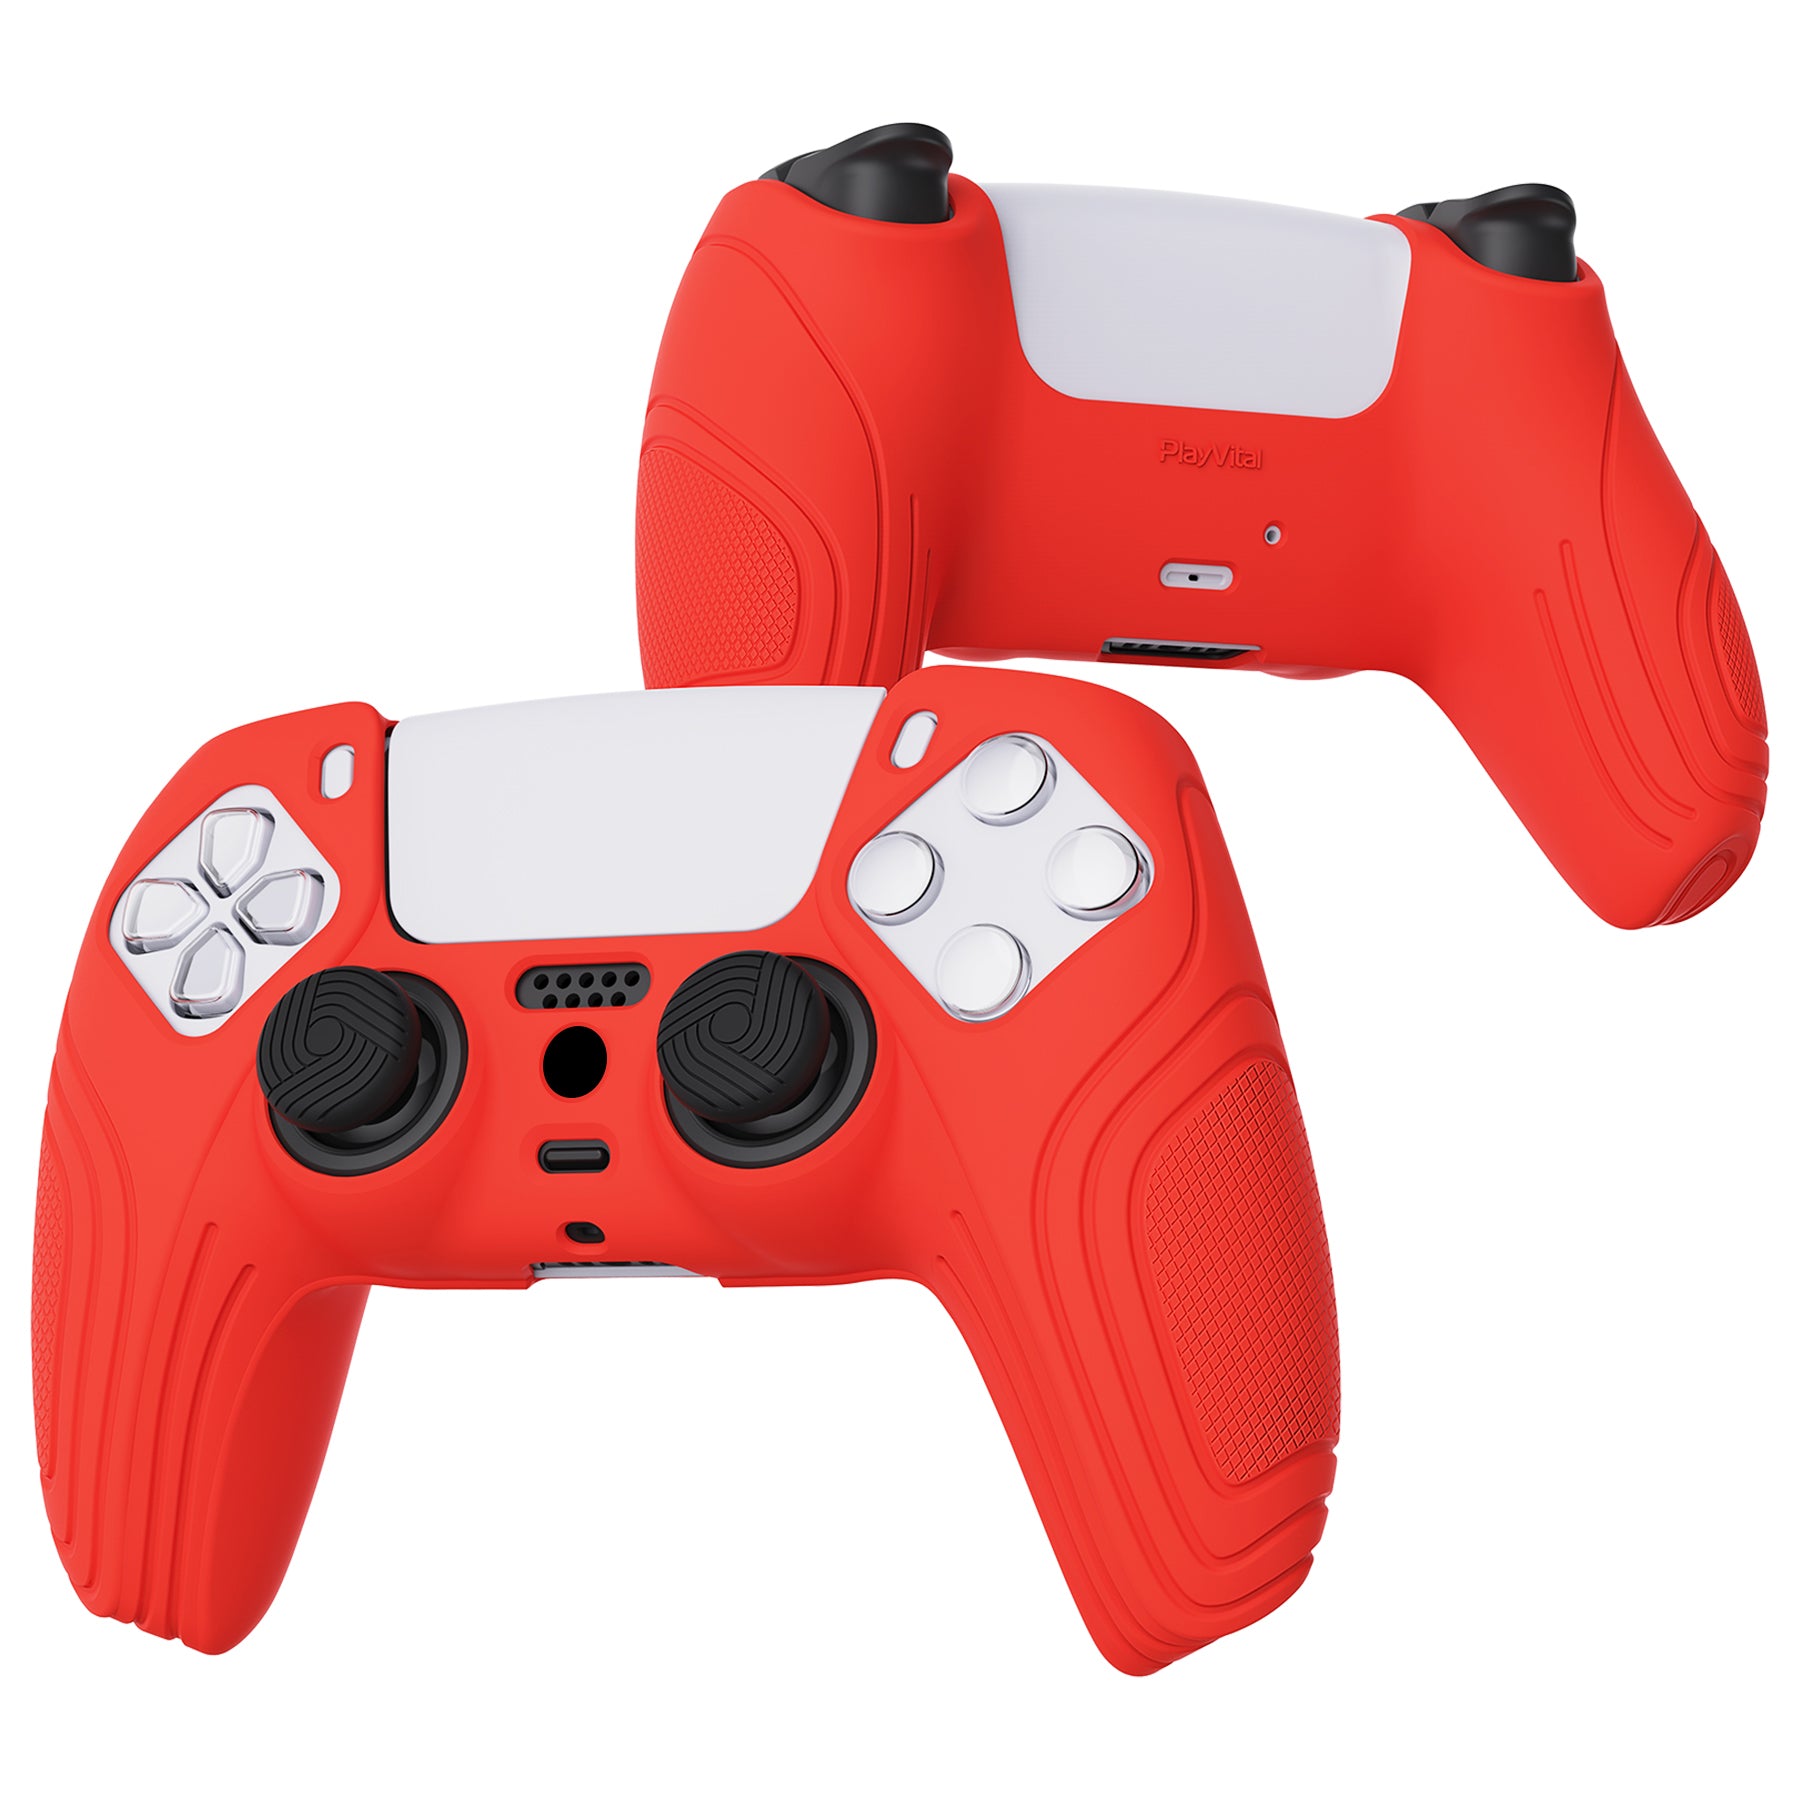 PlayVital Samurai Edition Anti-Slip Silicone Cover Skin with Thumb Grip Caps for PS5 Wireless Controller - Passion Red - BWPF012 PlayVital